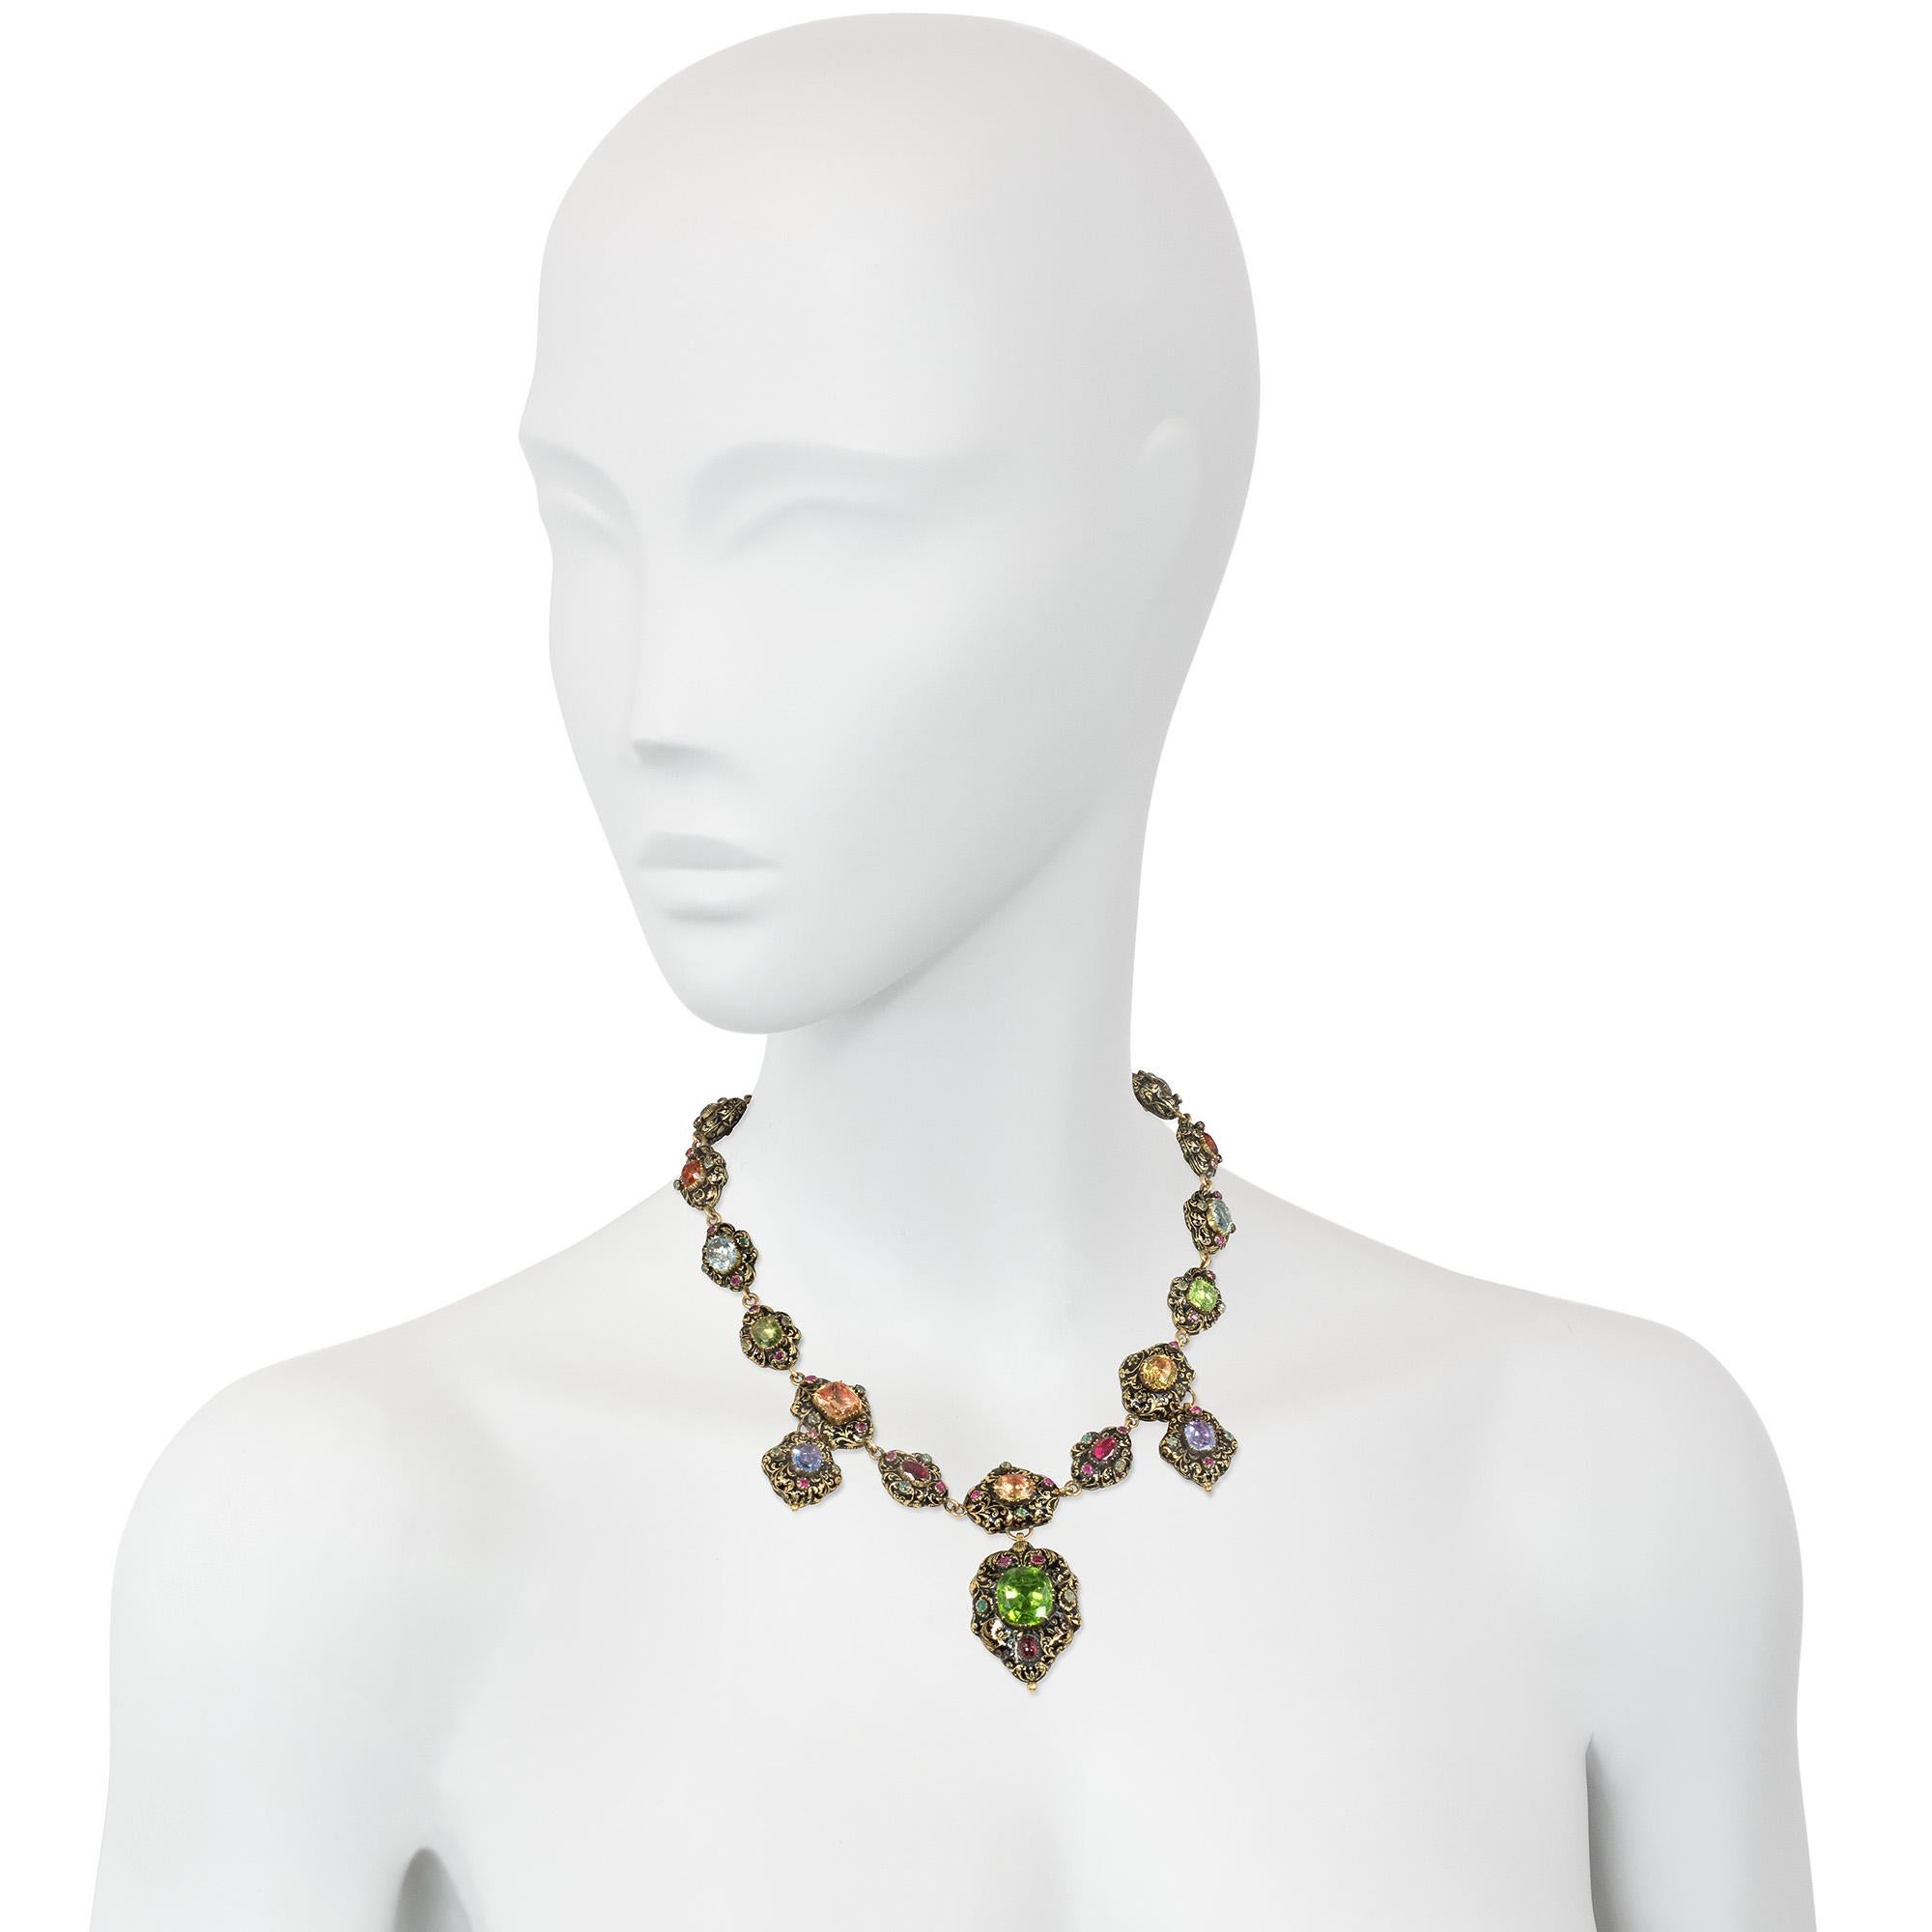 Women's or Men's Important Antique Early-19th Century Swiss Enamel, Gold, and Multi-Gem Necklace For Sale